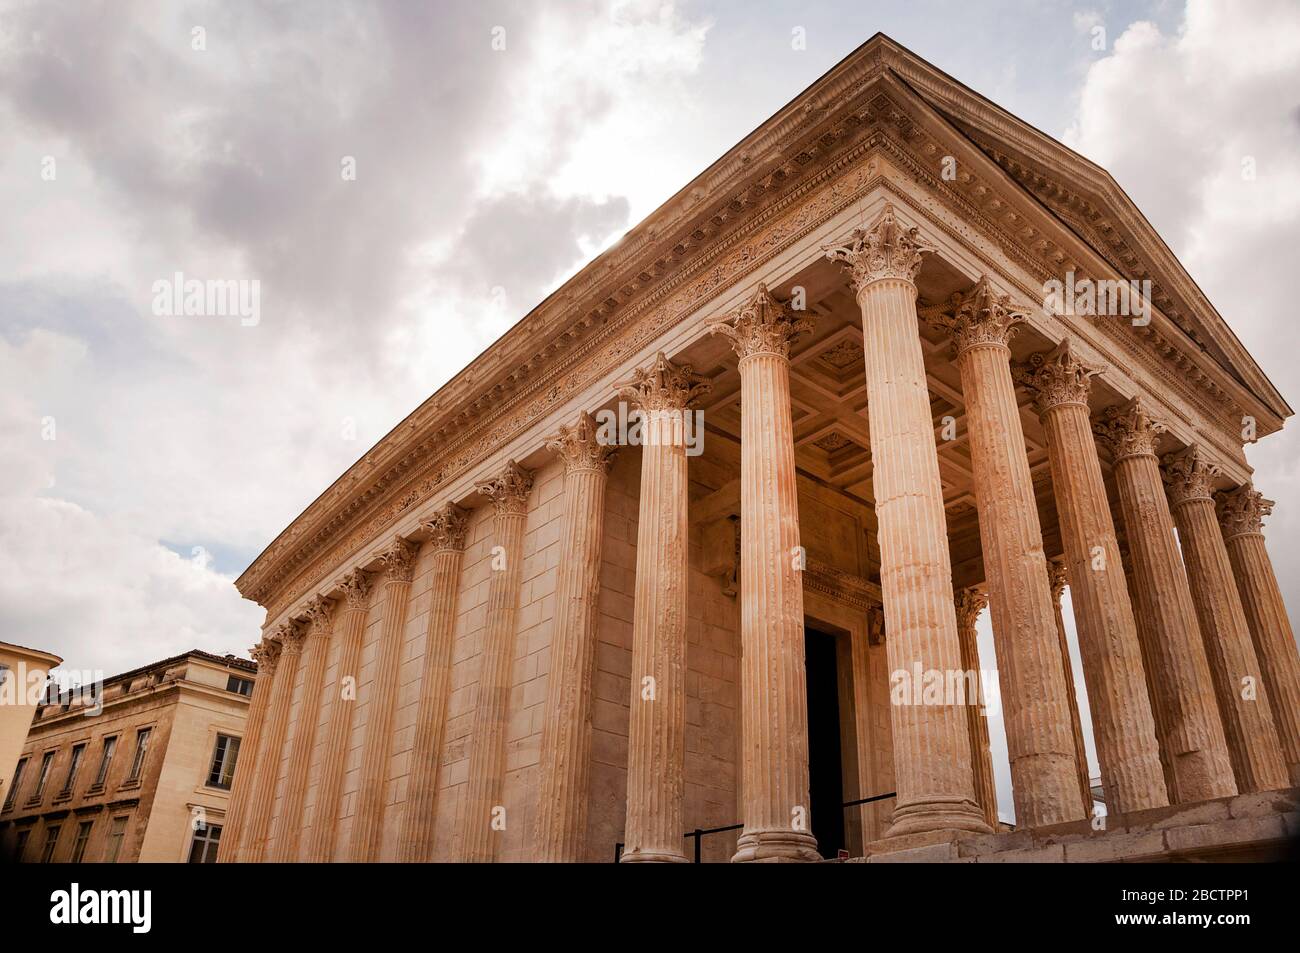 Executed in the Corinthian order, meaning the columns on the sides and back are engaged, or attached to the wall, Maison Carrée, Nîmes, France. Stock Photo